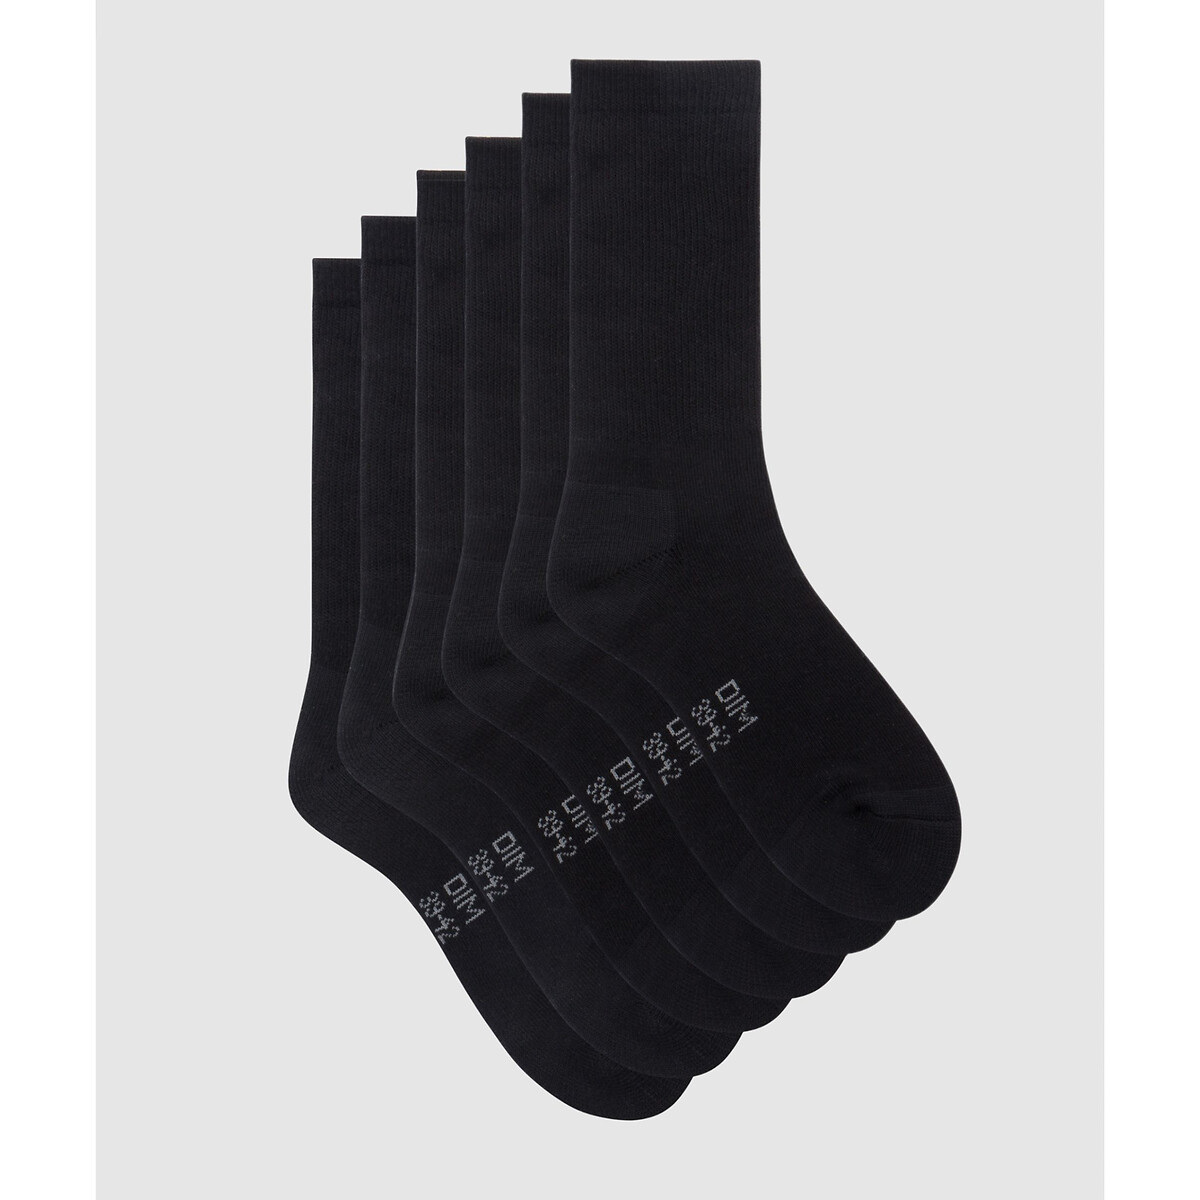 Image of Pack of 3 Pairs of Outdoor Socks in Cotton Mix